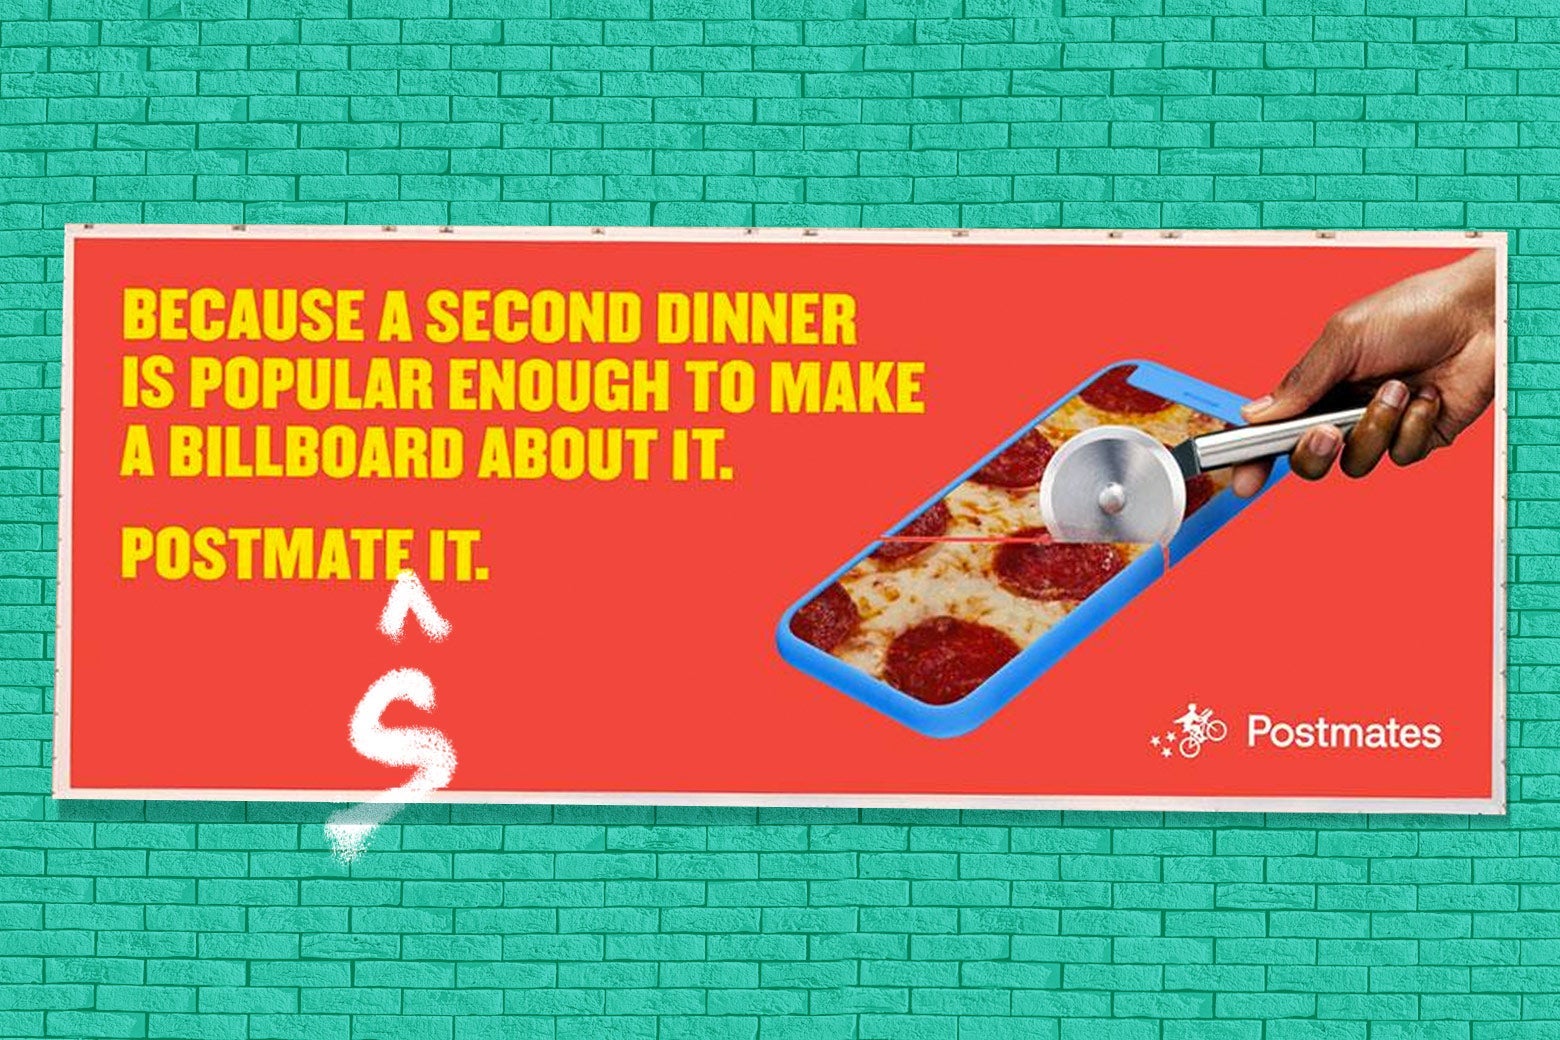 On a brick wall, a Postmates billboard reading "Because a second dinner is popular enough to make a billboard about it. Postmate it," with an S and a caret graffitied in under "Postmate."